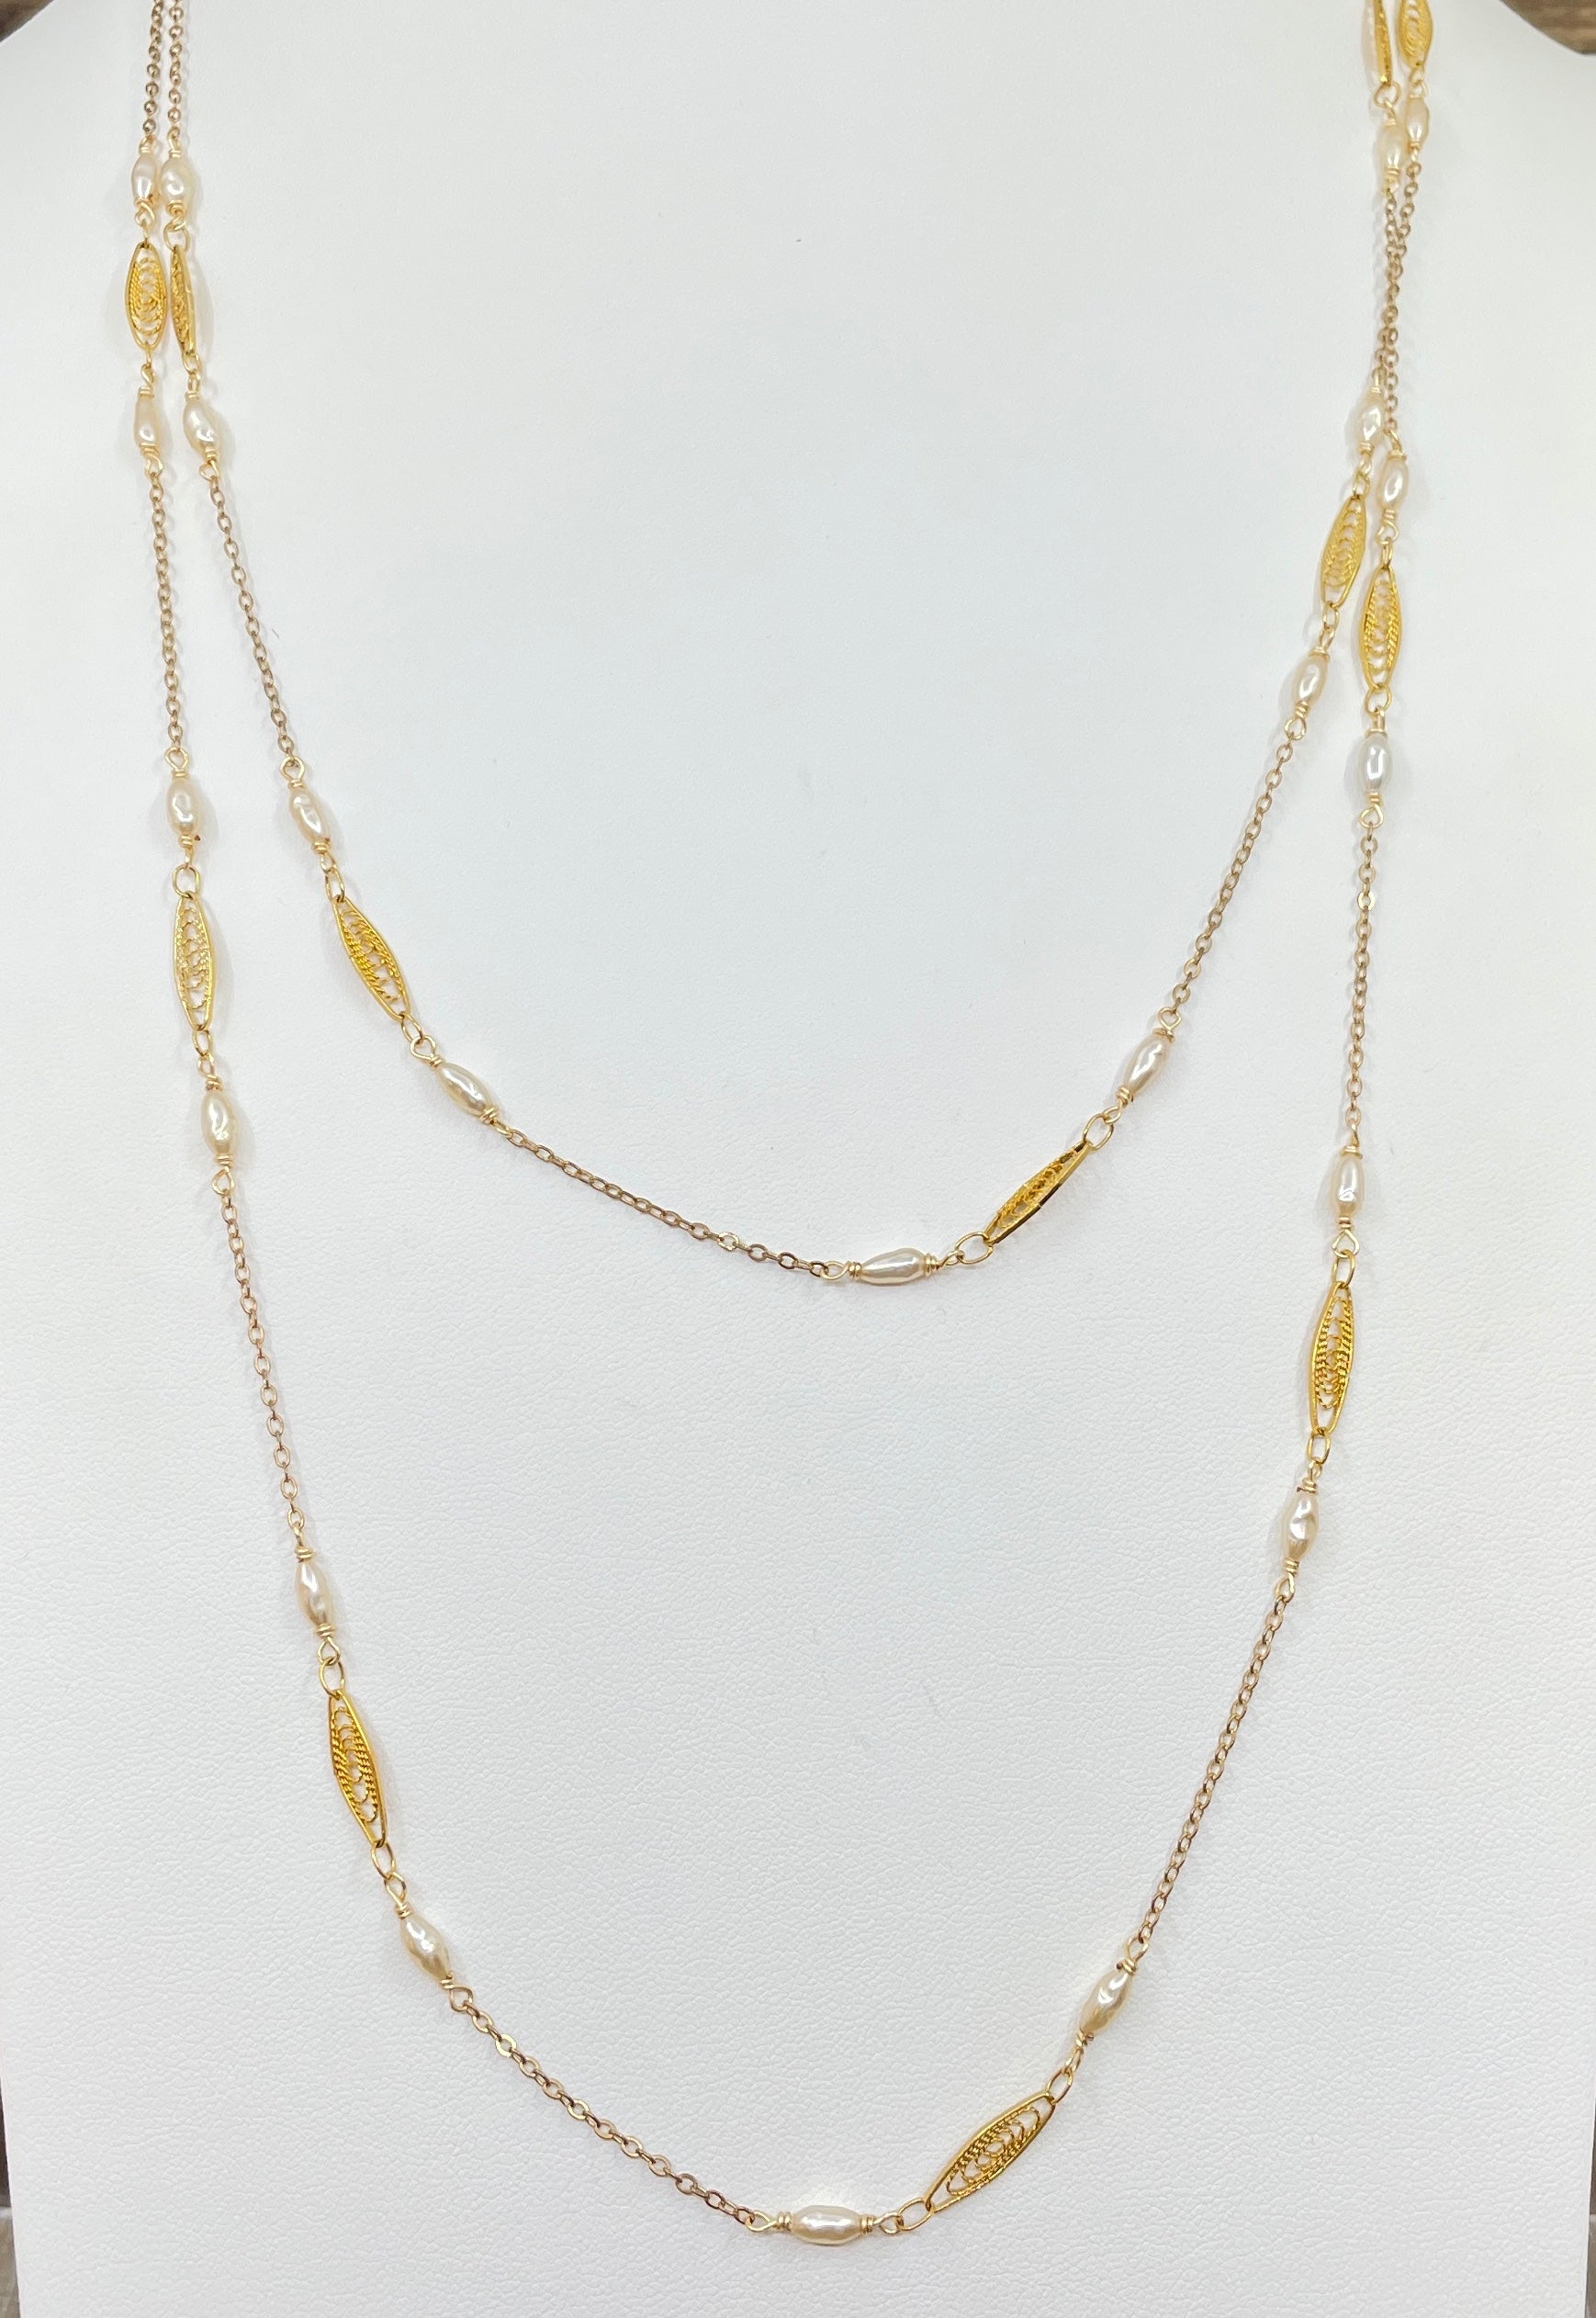 Vintage Gold Plated Miriam Haskell Necklace